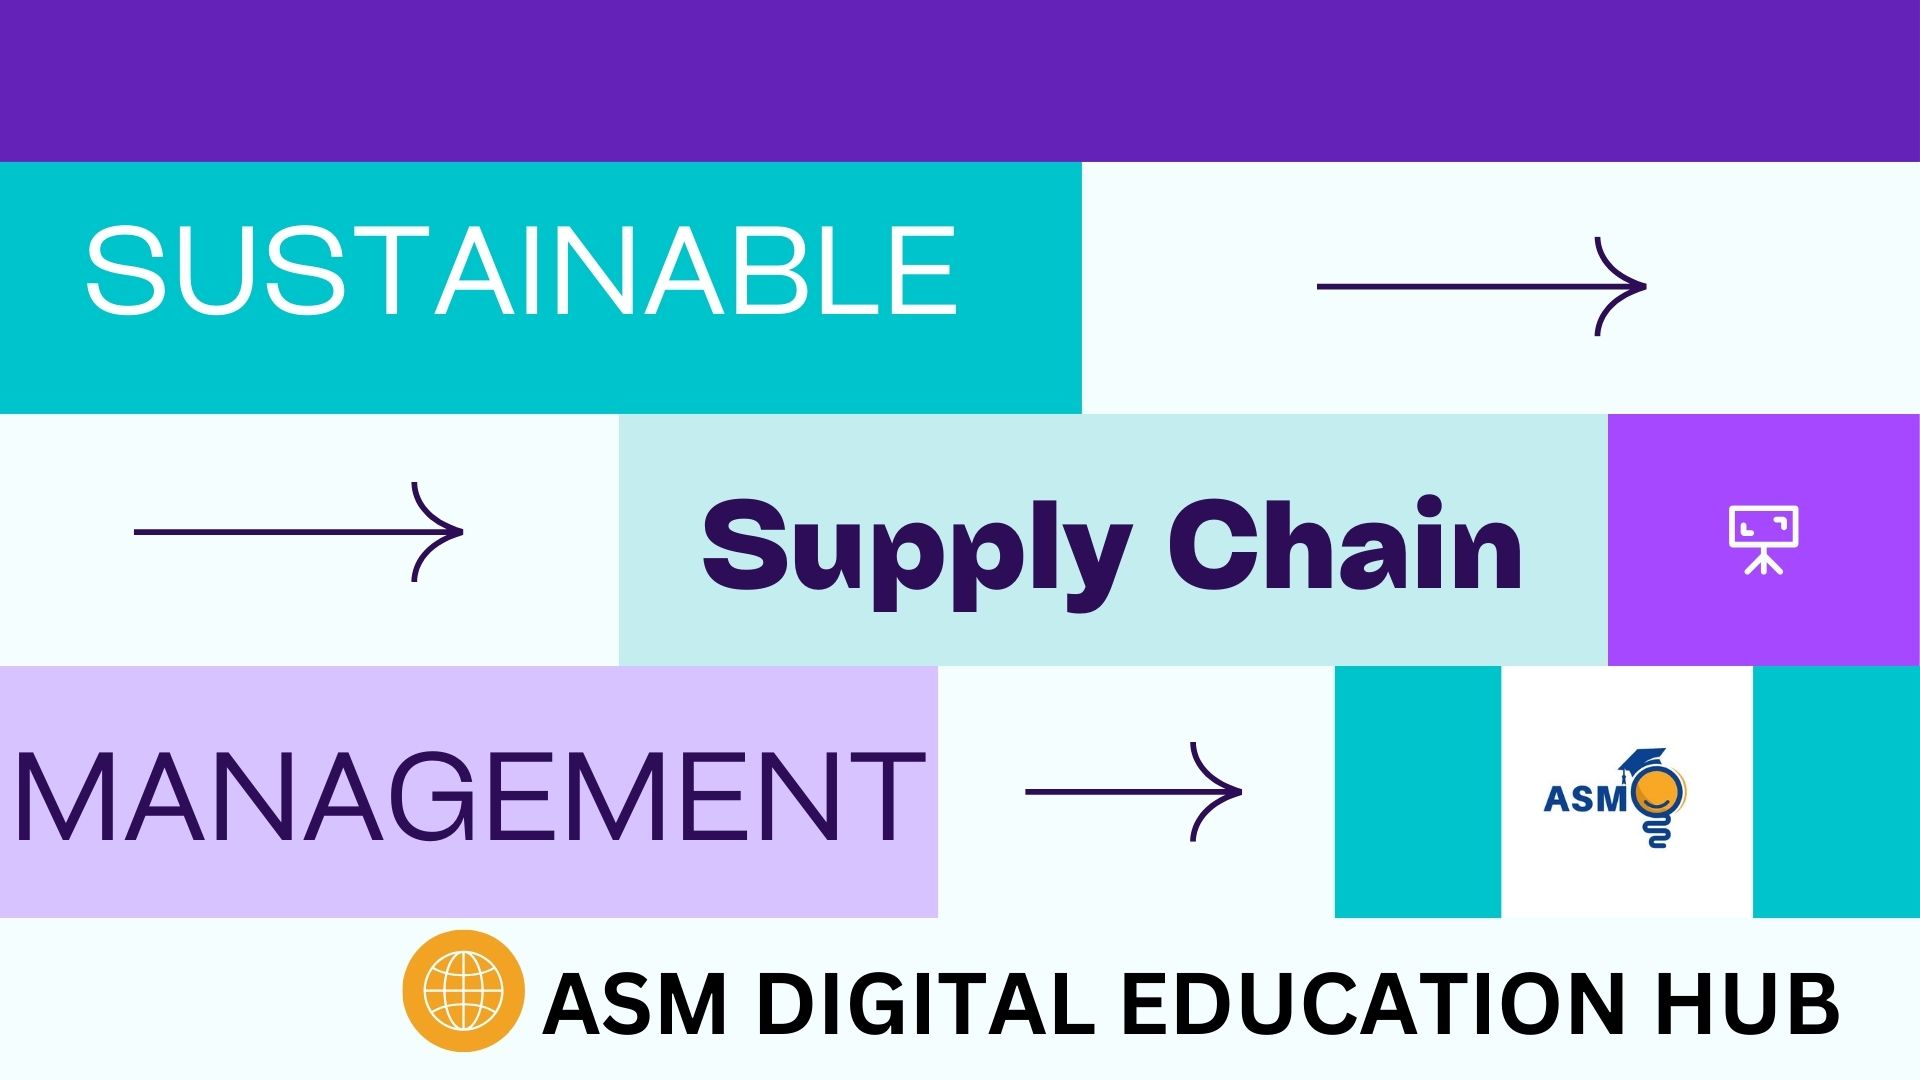 Sustainable sourcing practices, Circular economy in supply chains, Supply chain risk management for sustainability, Blockchain for sustainable supply chains, Sustainable packaging solutions